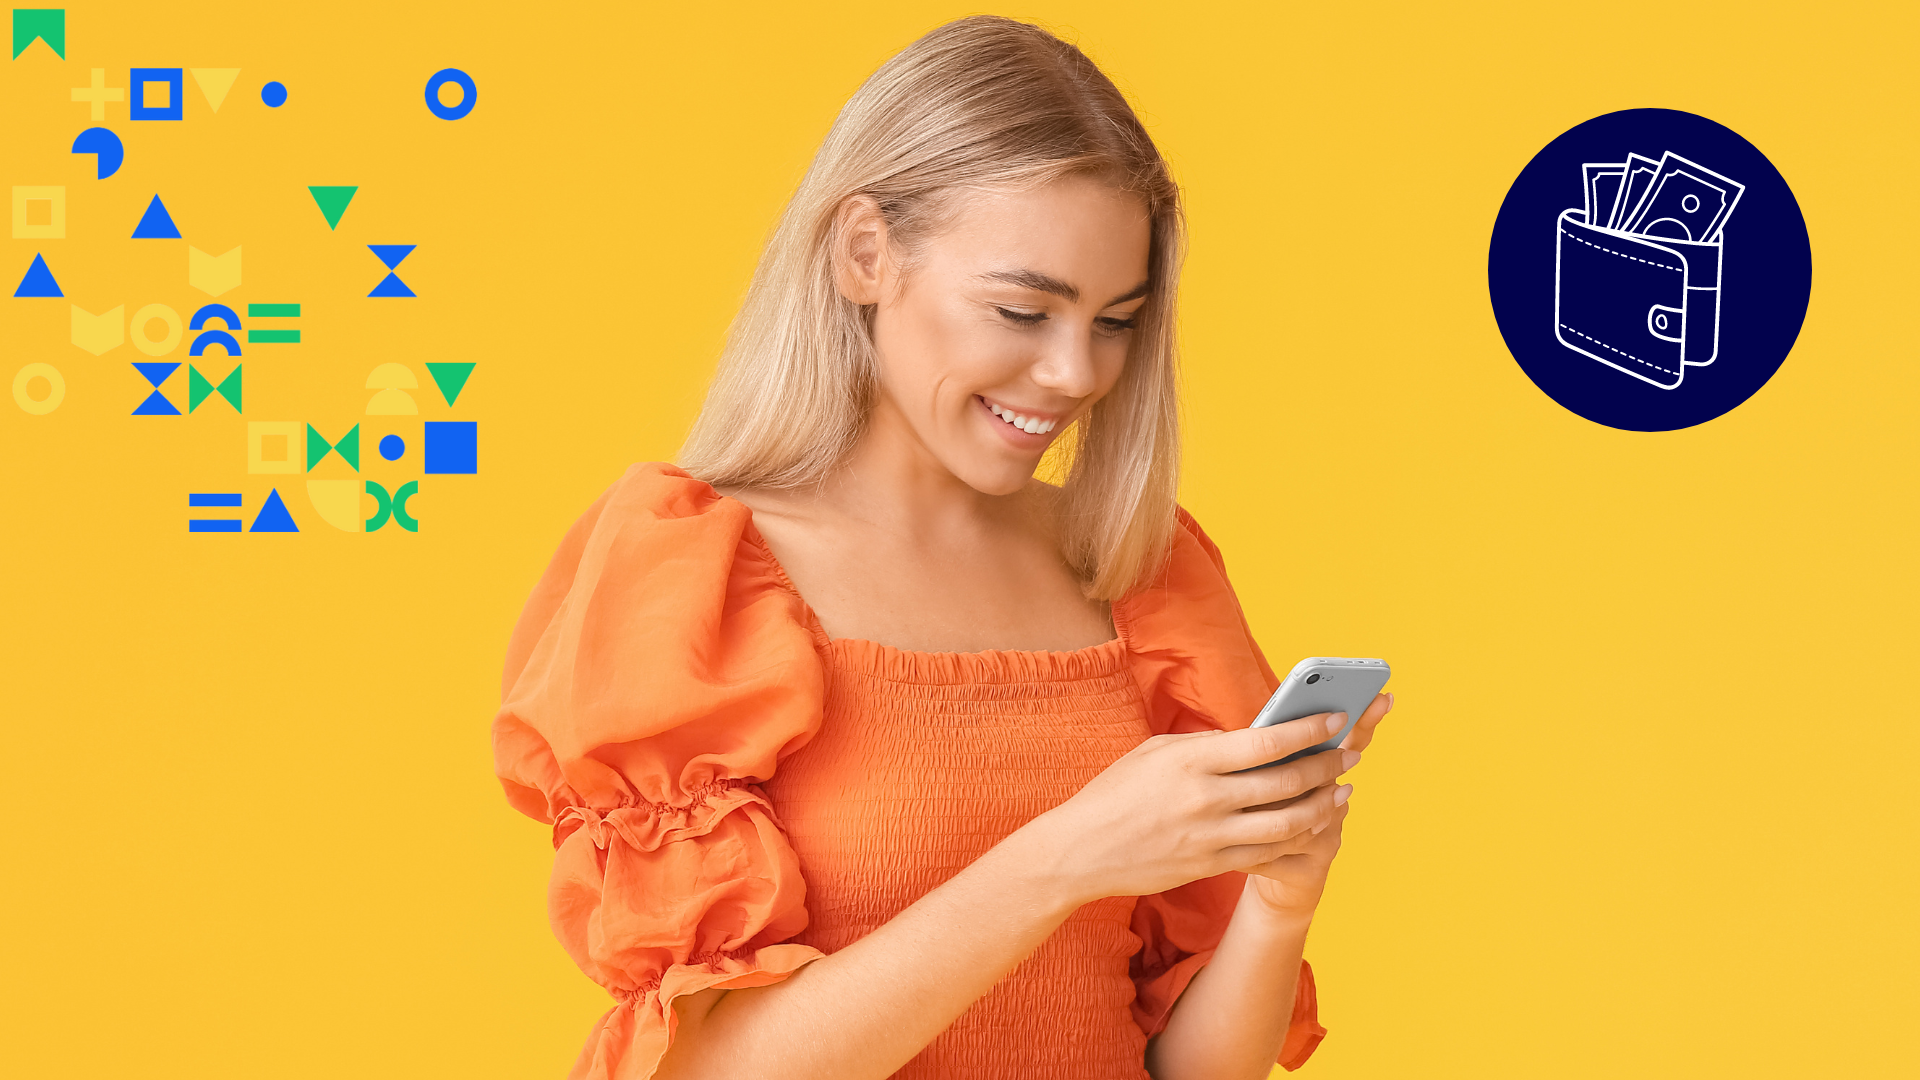 Image of a young blonde wearing an orange blouse on a yellow background using a cell phone to represent mobile banking. There is an icon of a wallet with cash inside. 